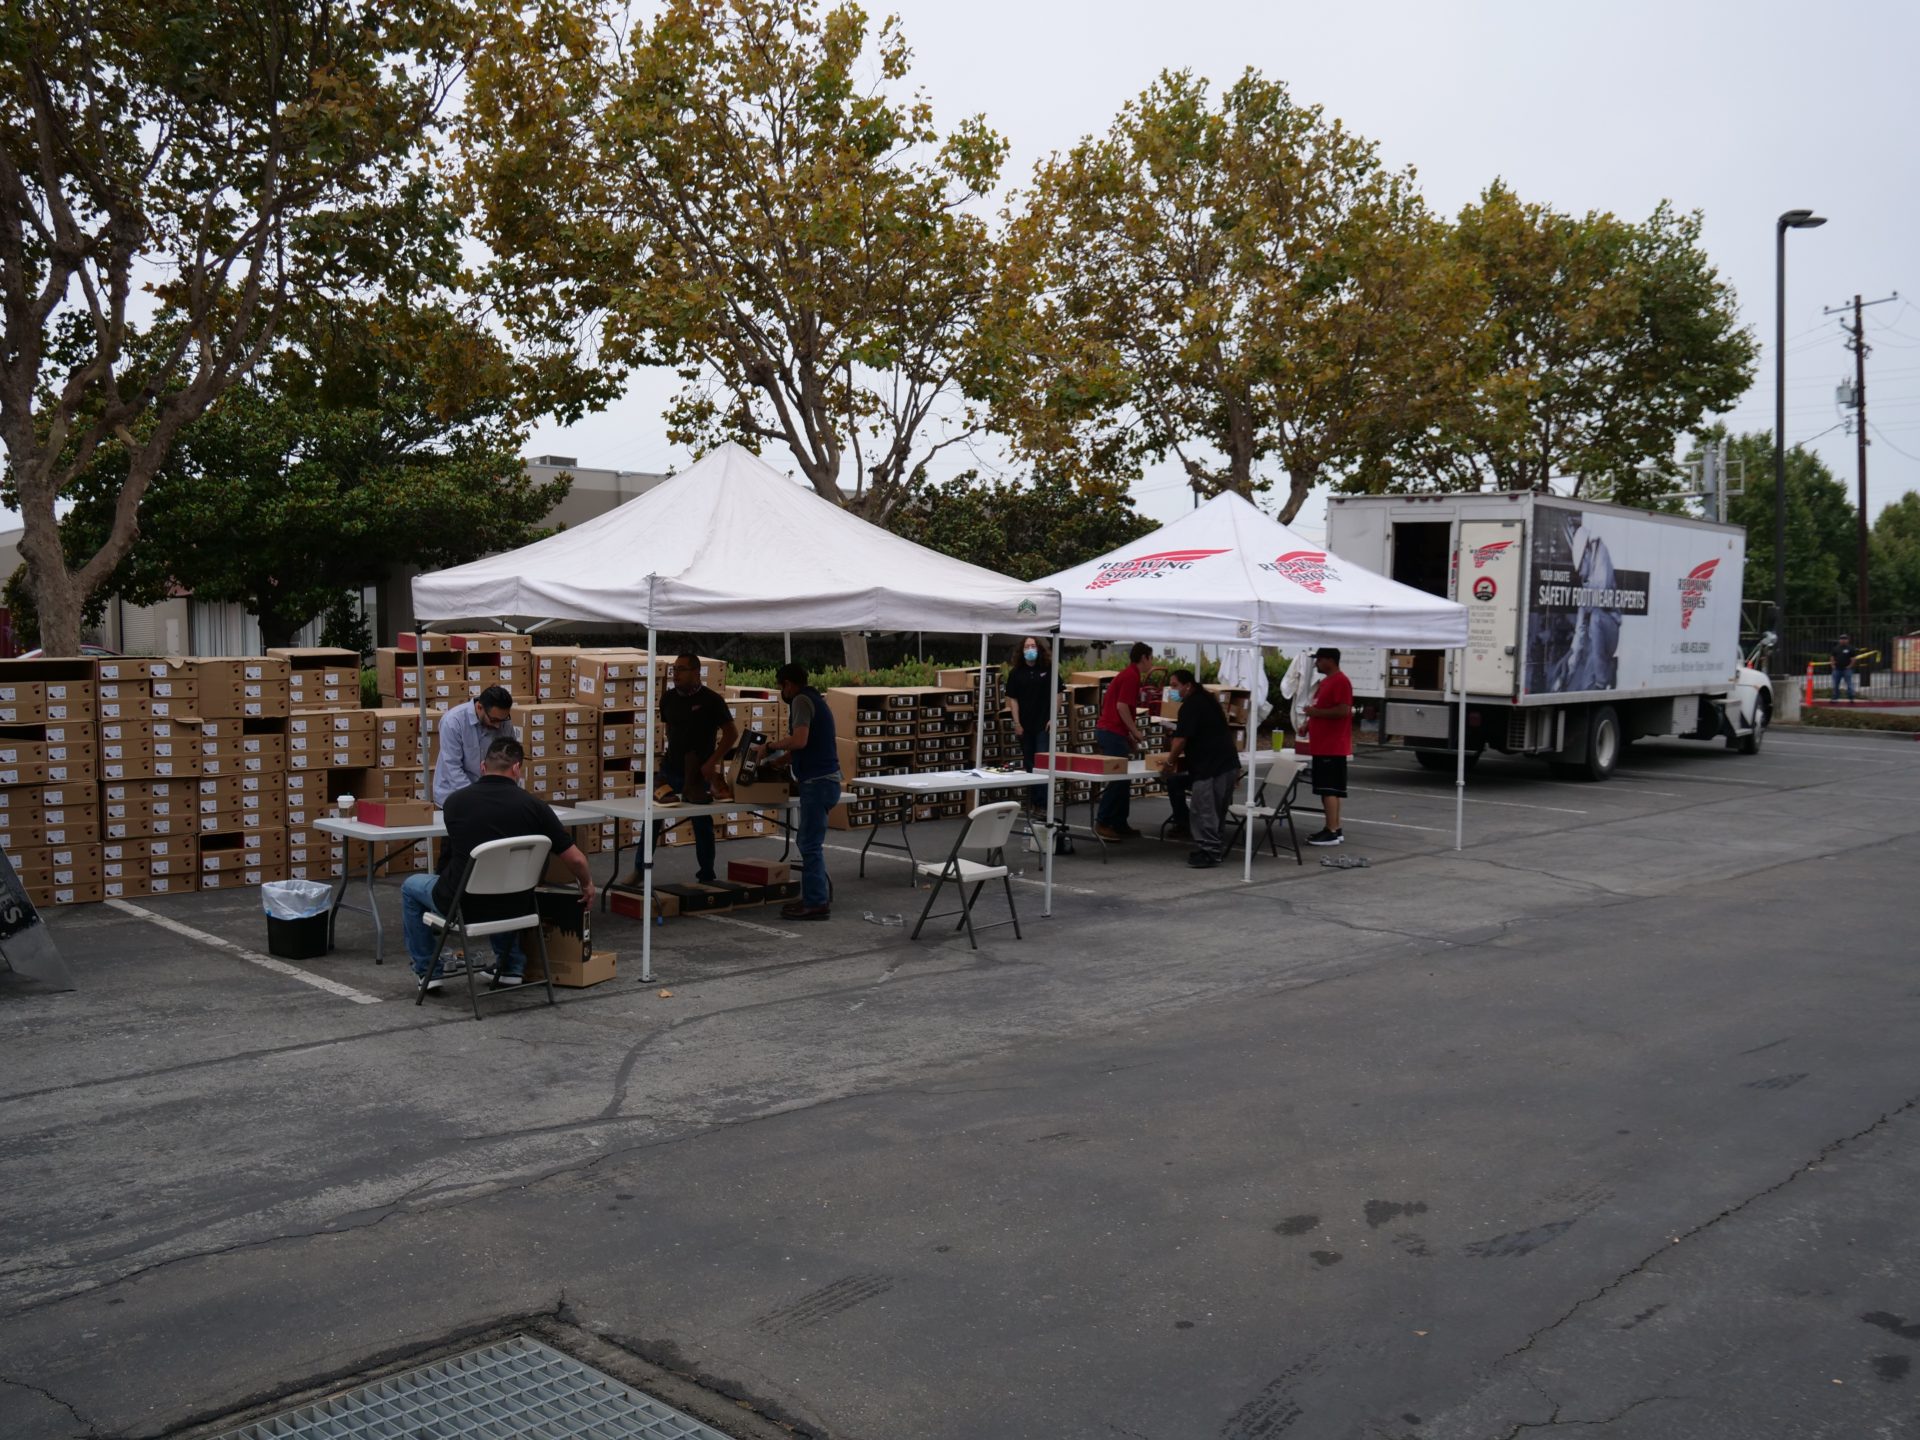 Image from the Gallery: STAR Awards Drive-Thru Event – San Leandro, CA